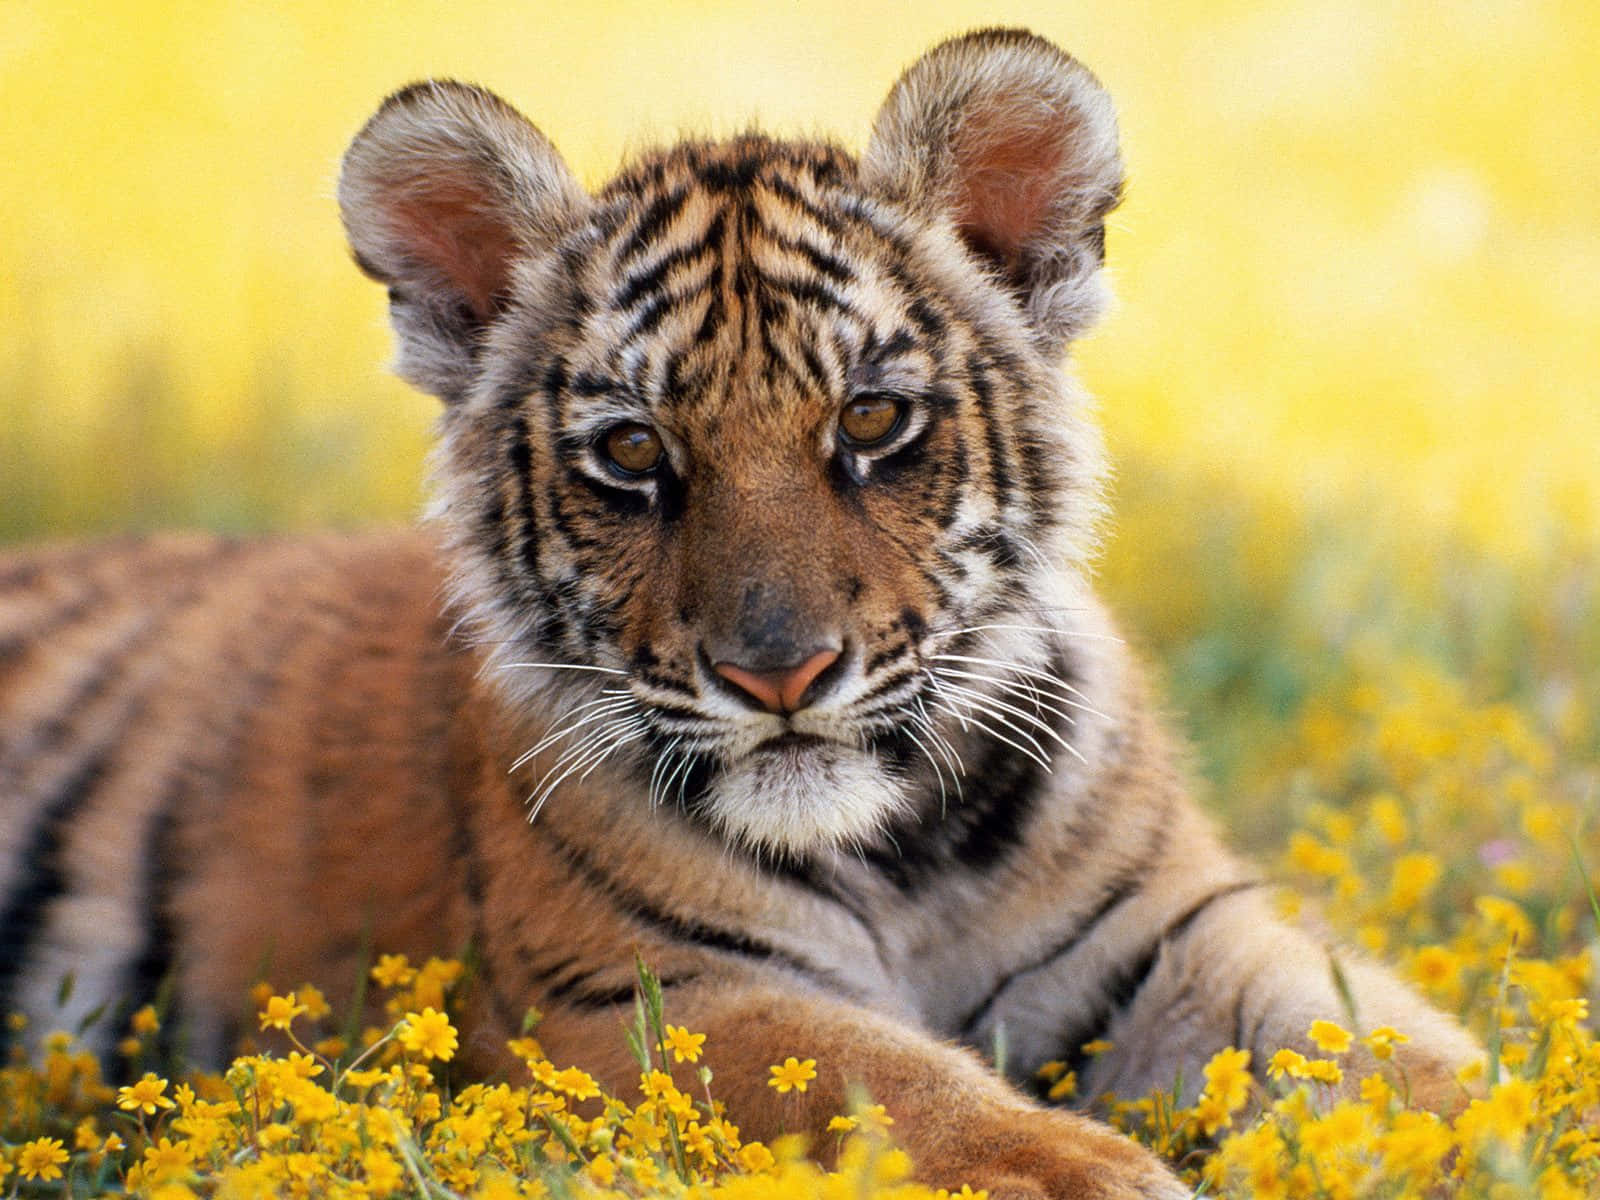 Cute Tiger Round Ears Picture